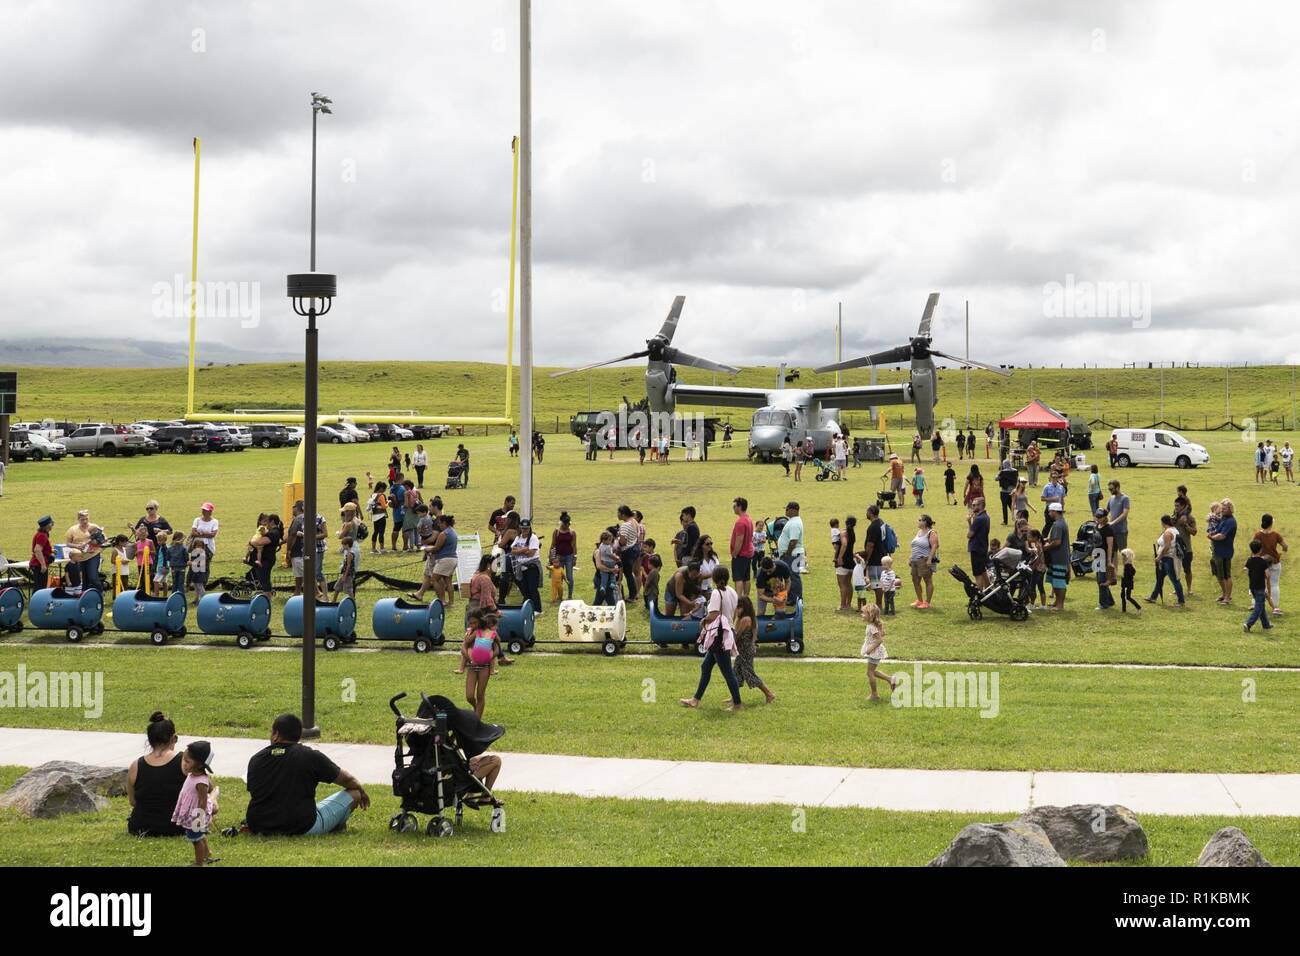 U.S. Marines with Marine Medium Tiltrotor Squadron (VMM) 363, attend the Waimea Fall Festival at the Waimea District Park with a static display of one of their MV-22B Osprey aircraft, Oct. 13, 2018. VMM-363 flew one of their aircraft from Marine Corps Base Hawaii on Oahu to the Waimea Fall Festival, providing a static display and subject matter experts for a first-hand experience to the festival’s attendants. The squadron arrived to Hawaii earlier this year increasing the combat capability and crisis response within the Indo-Pacific region. Stock Photo